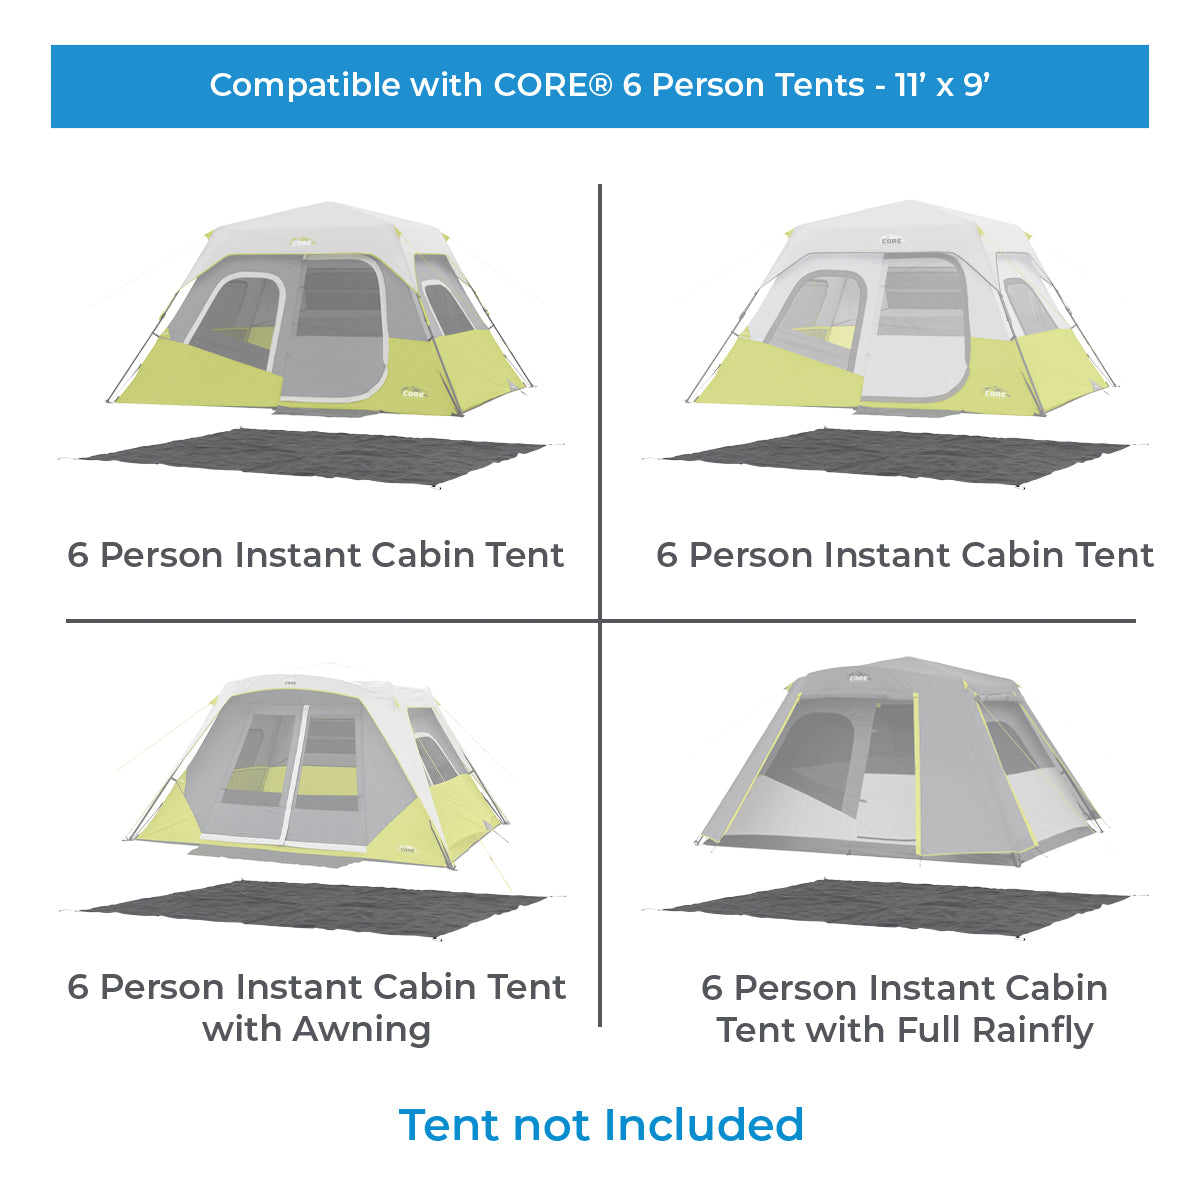 Footprint for 6 Person Tents - 11' x 9'